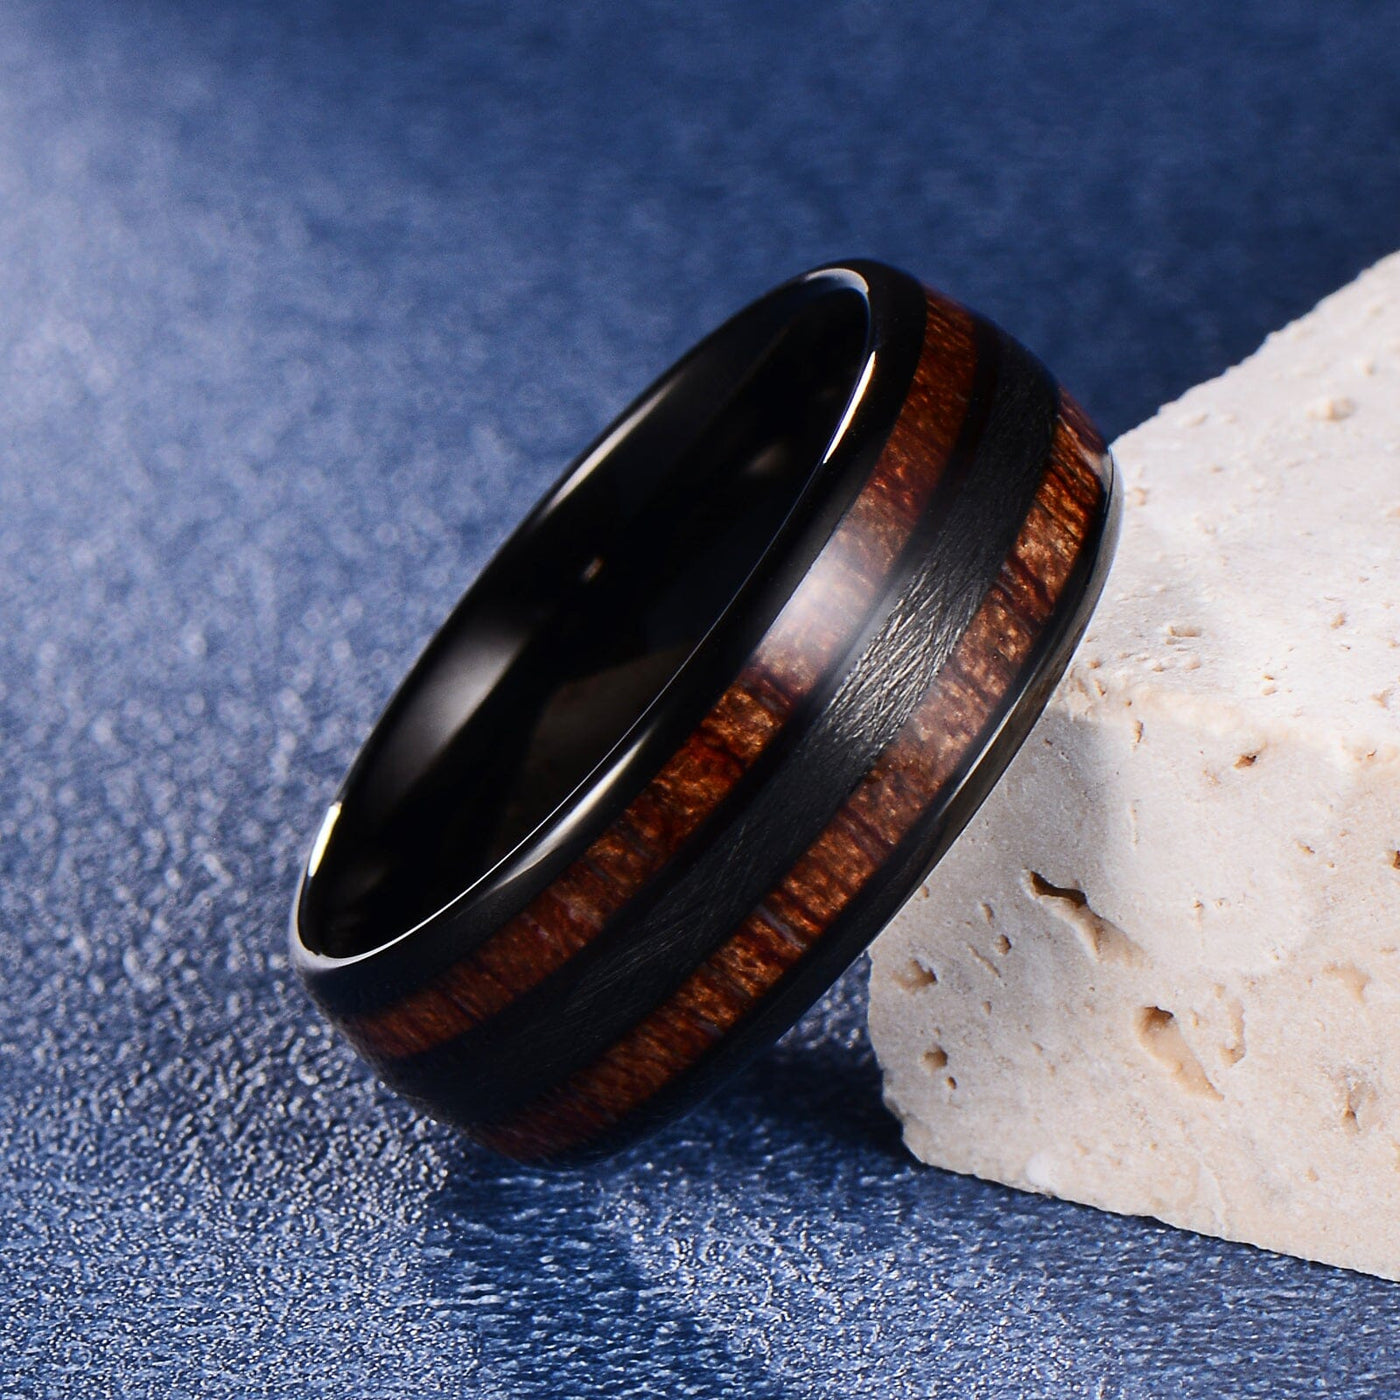 Men's Double Wood Inlay Brushed Black Tungsten Ring WR-215 Men's Ring Ouyuan Jewelry 